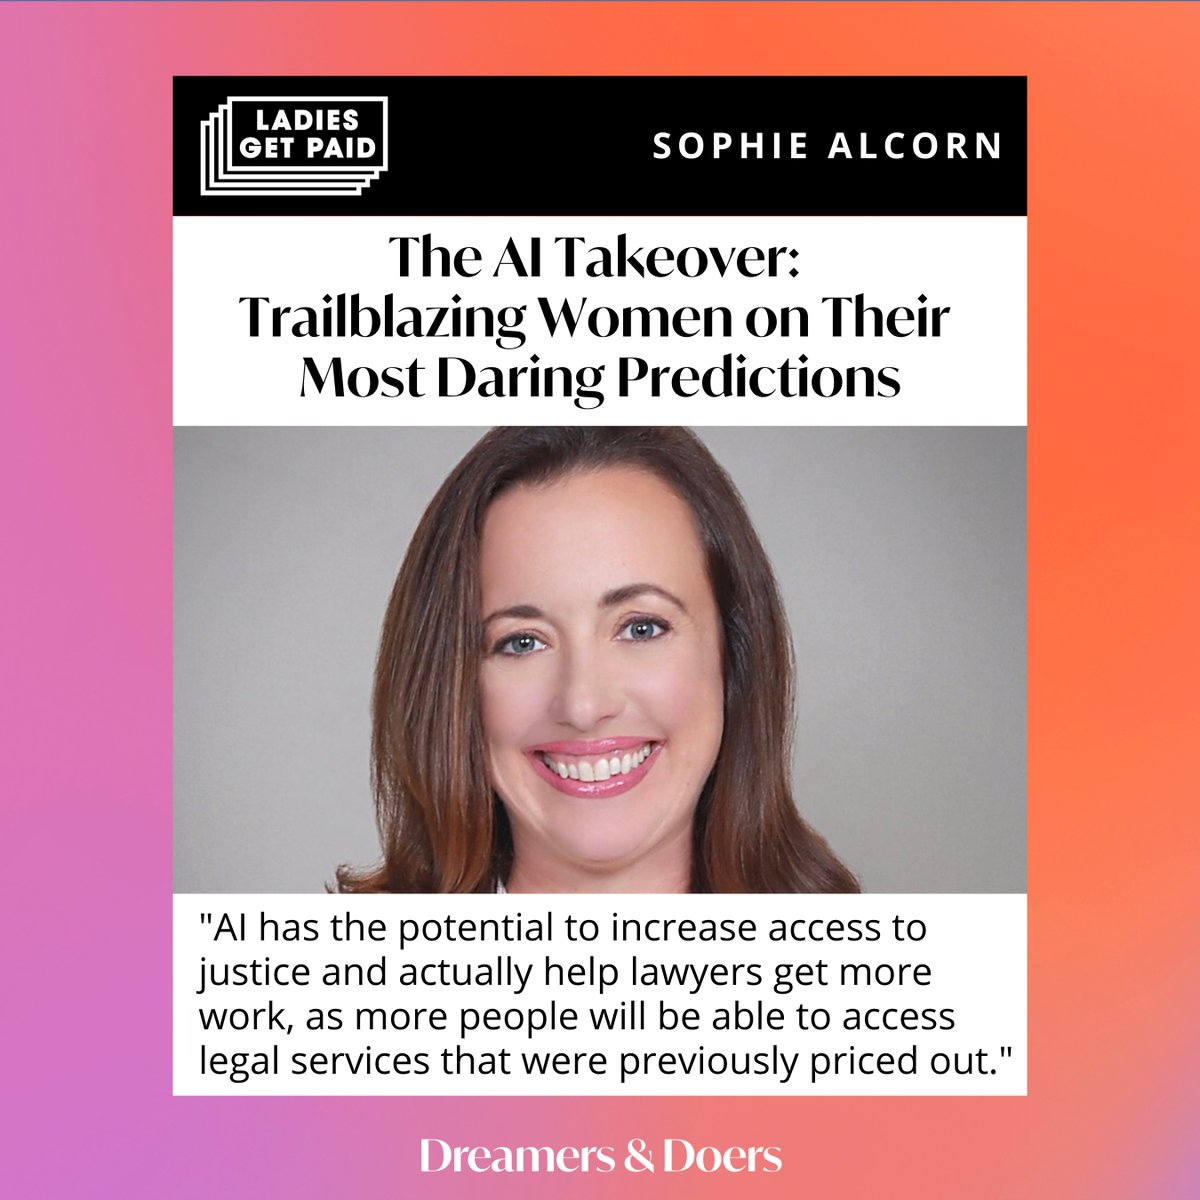 Our Founder & CEO, @Sophie_Alcorn, was featured in @ladiesgetpaid's 'Is AI Taking Over the World?' piece! 🌐🤖 Read her predictions and advice for embracing AI's potential here. ladiesgetpaid.com/blog/women-lea…